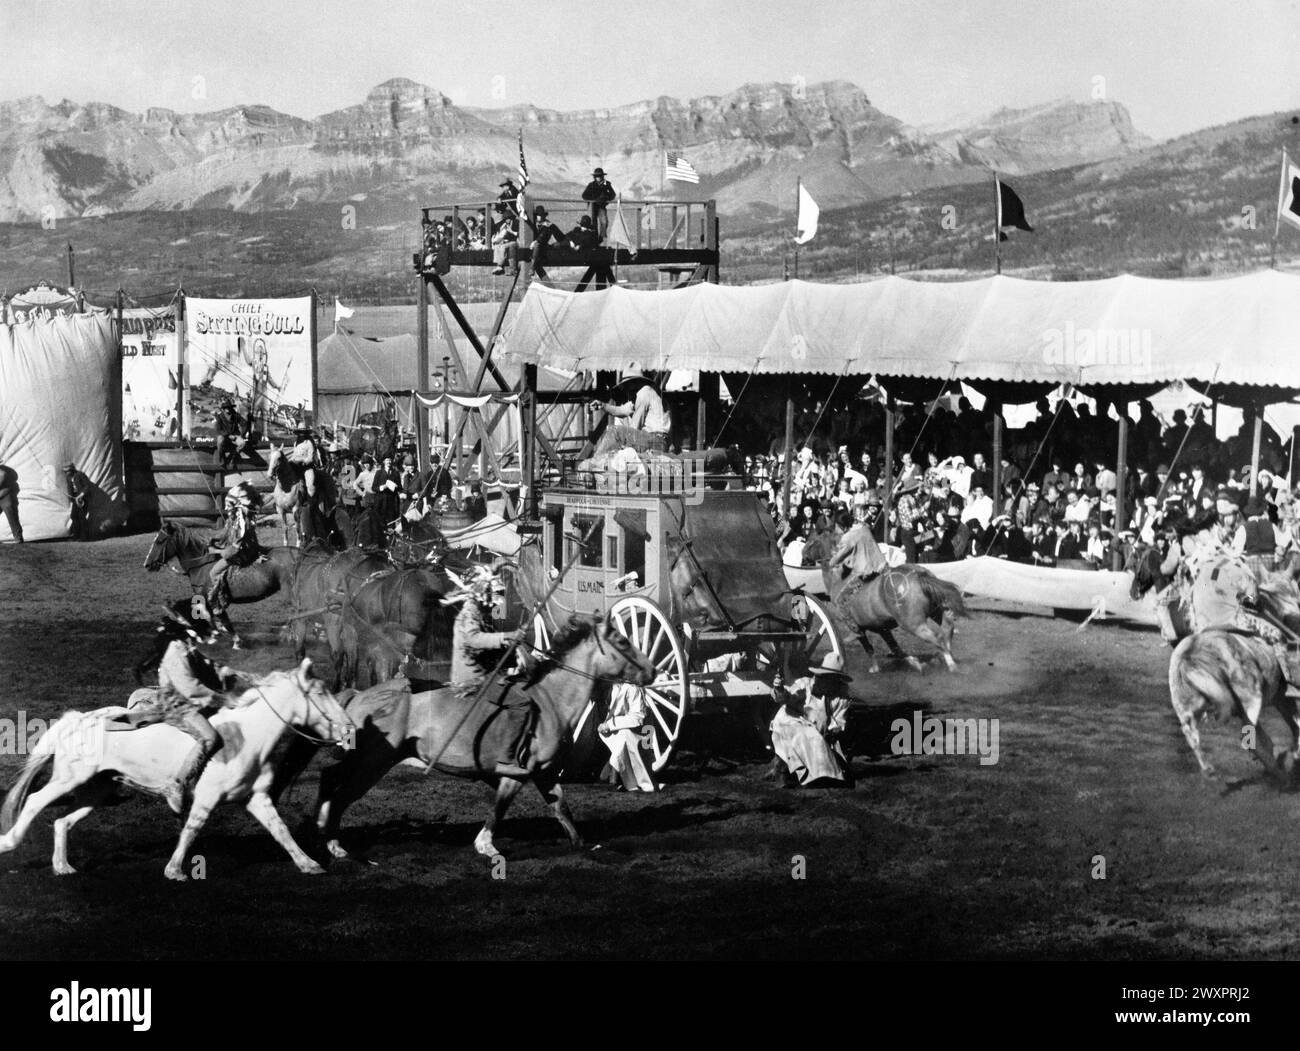 Buffalo Bill's Wild West Show, am Set des Films „Buffalo Bill and the Indians, or Sitting Bull's History Lektion“, United Artists, 1976 Stockfoto